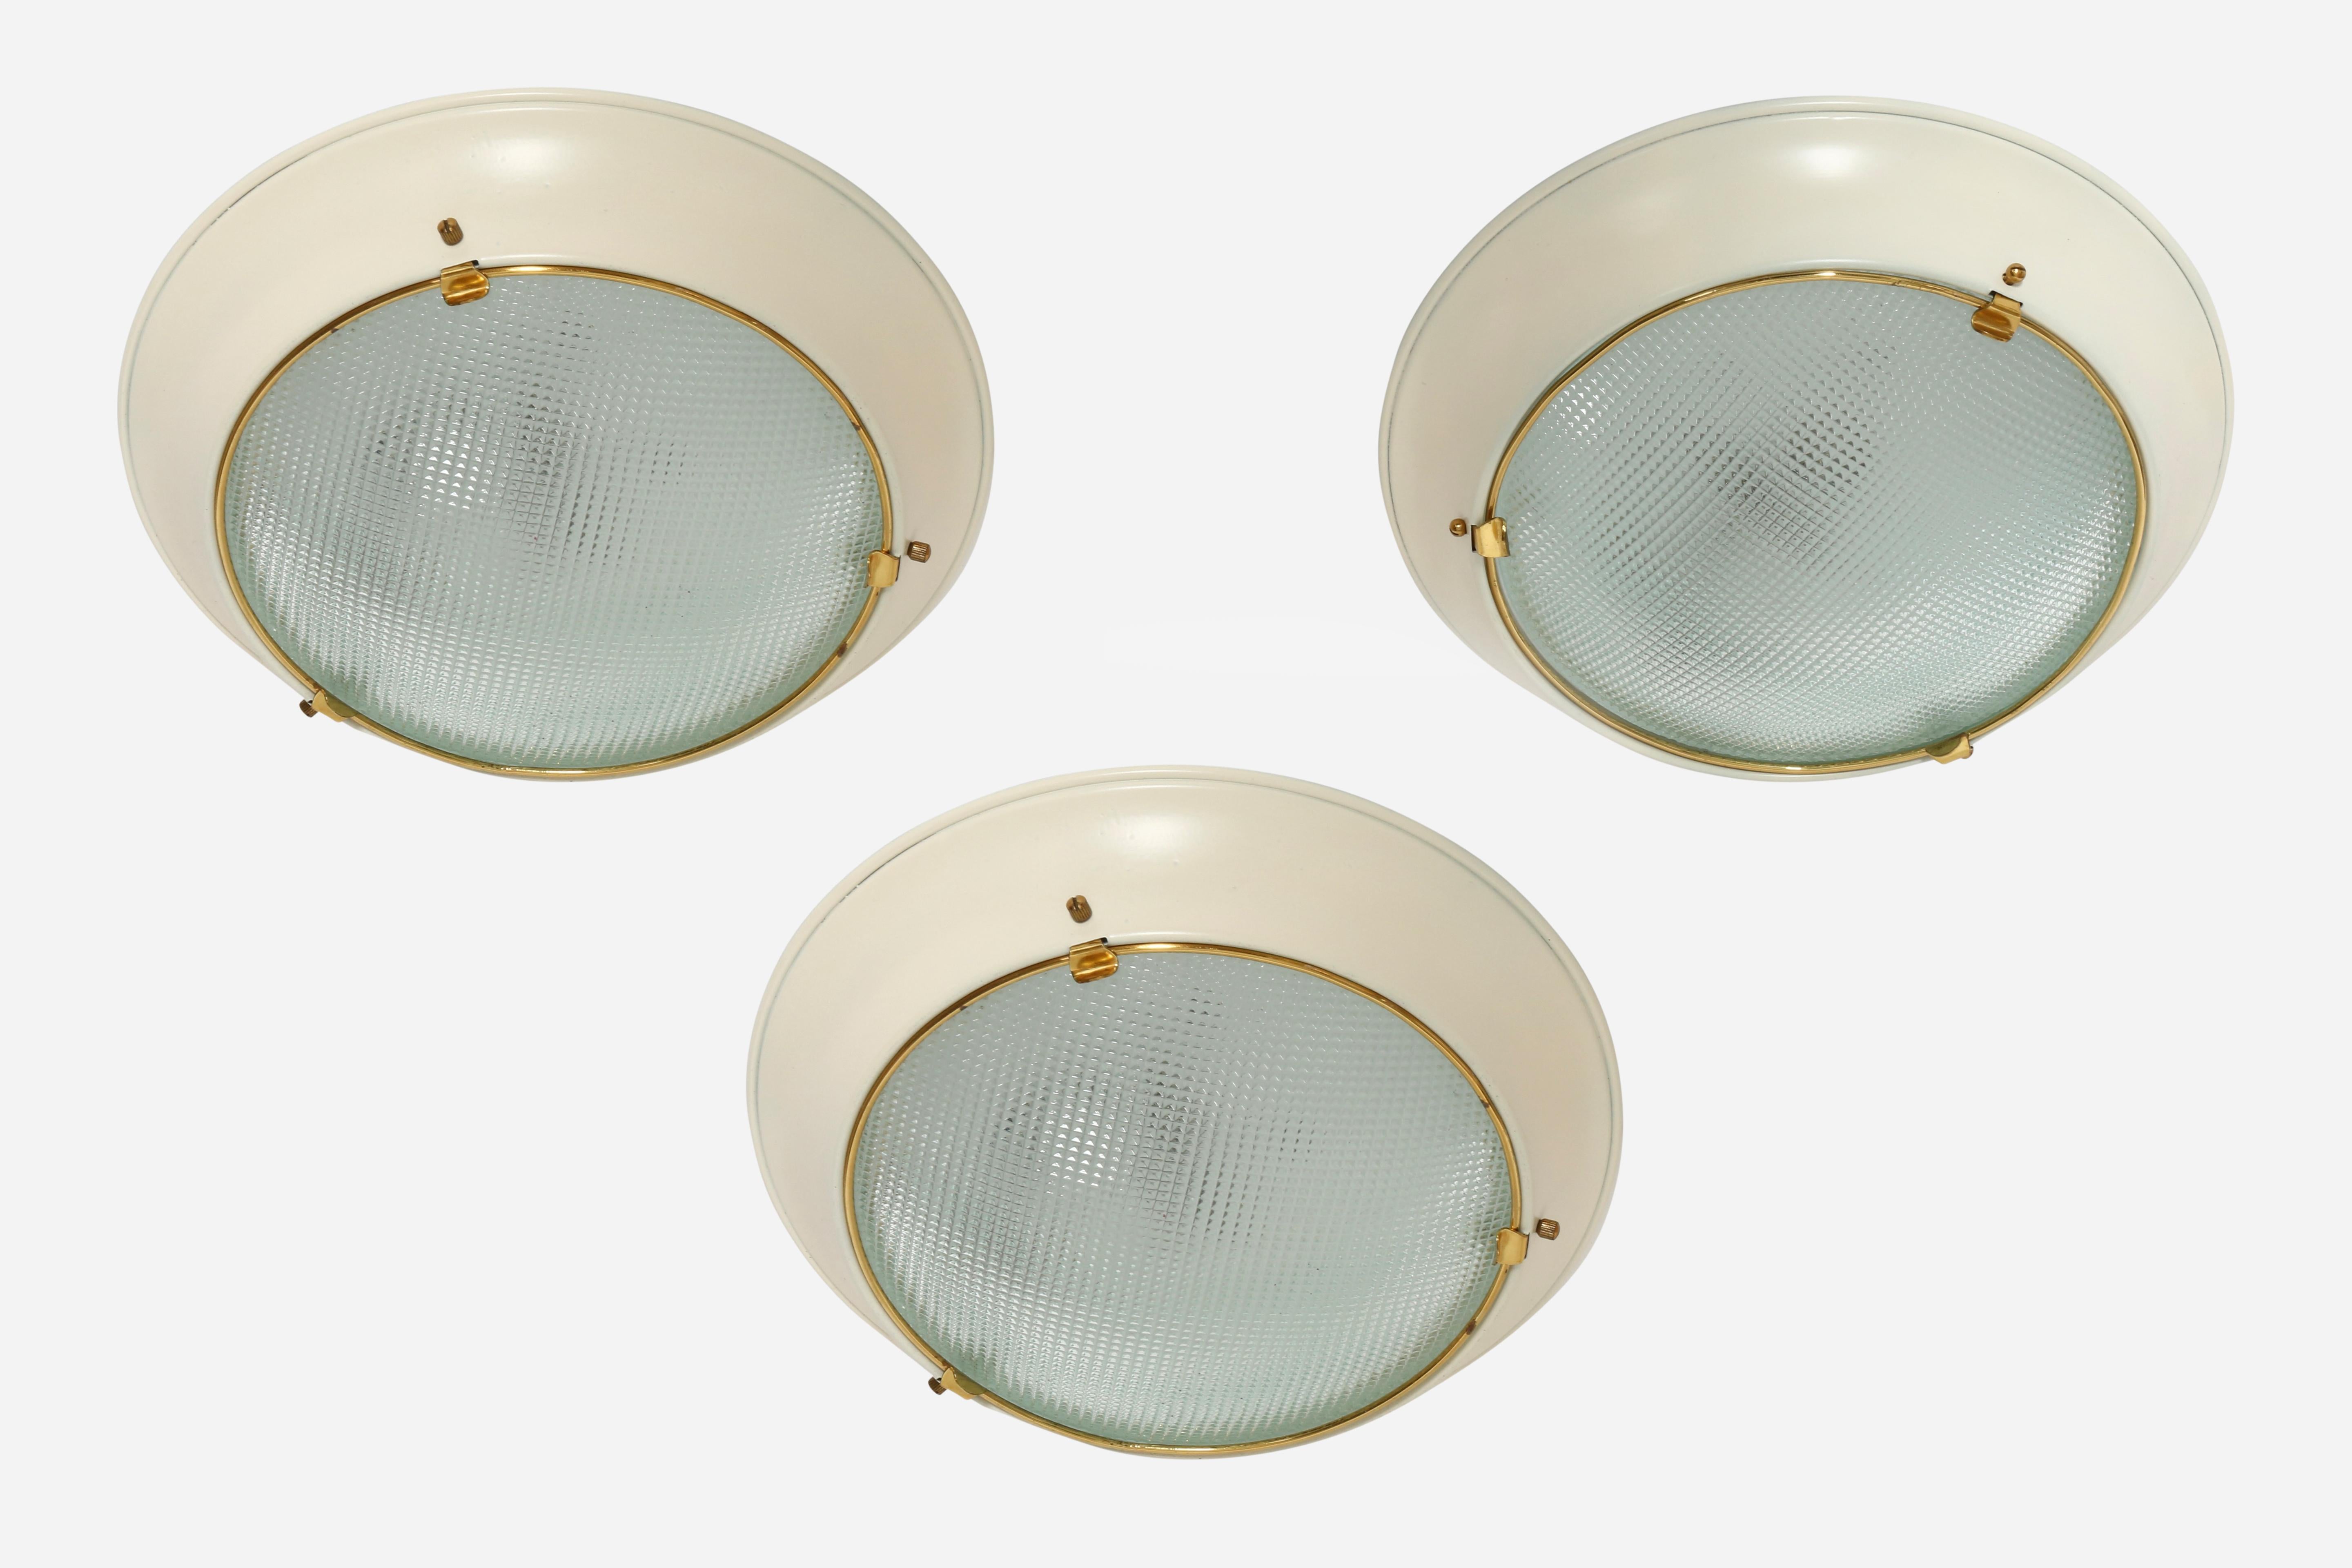 Stilnovo style flush mount wall or ceiling lights, set of 3.
Glass, brass, enameled metal.
One medium base socket each.
Rewired for US.
Priced as a set of 3.
4 available, and it can be made into a set of 4
 